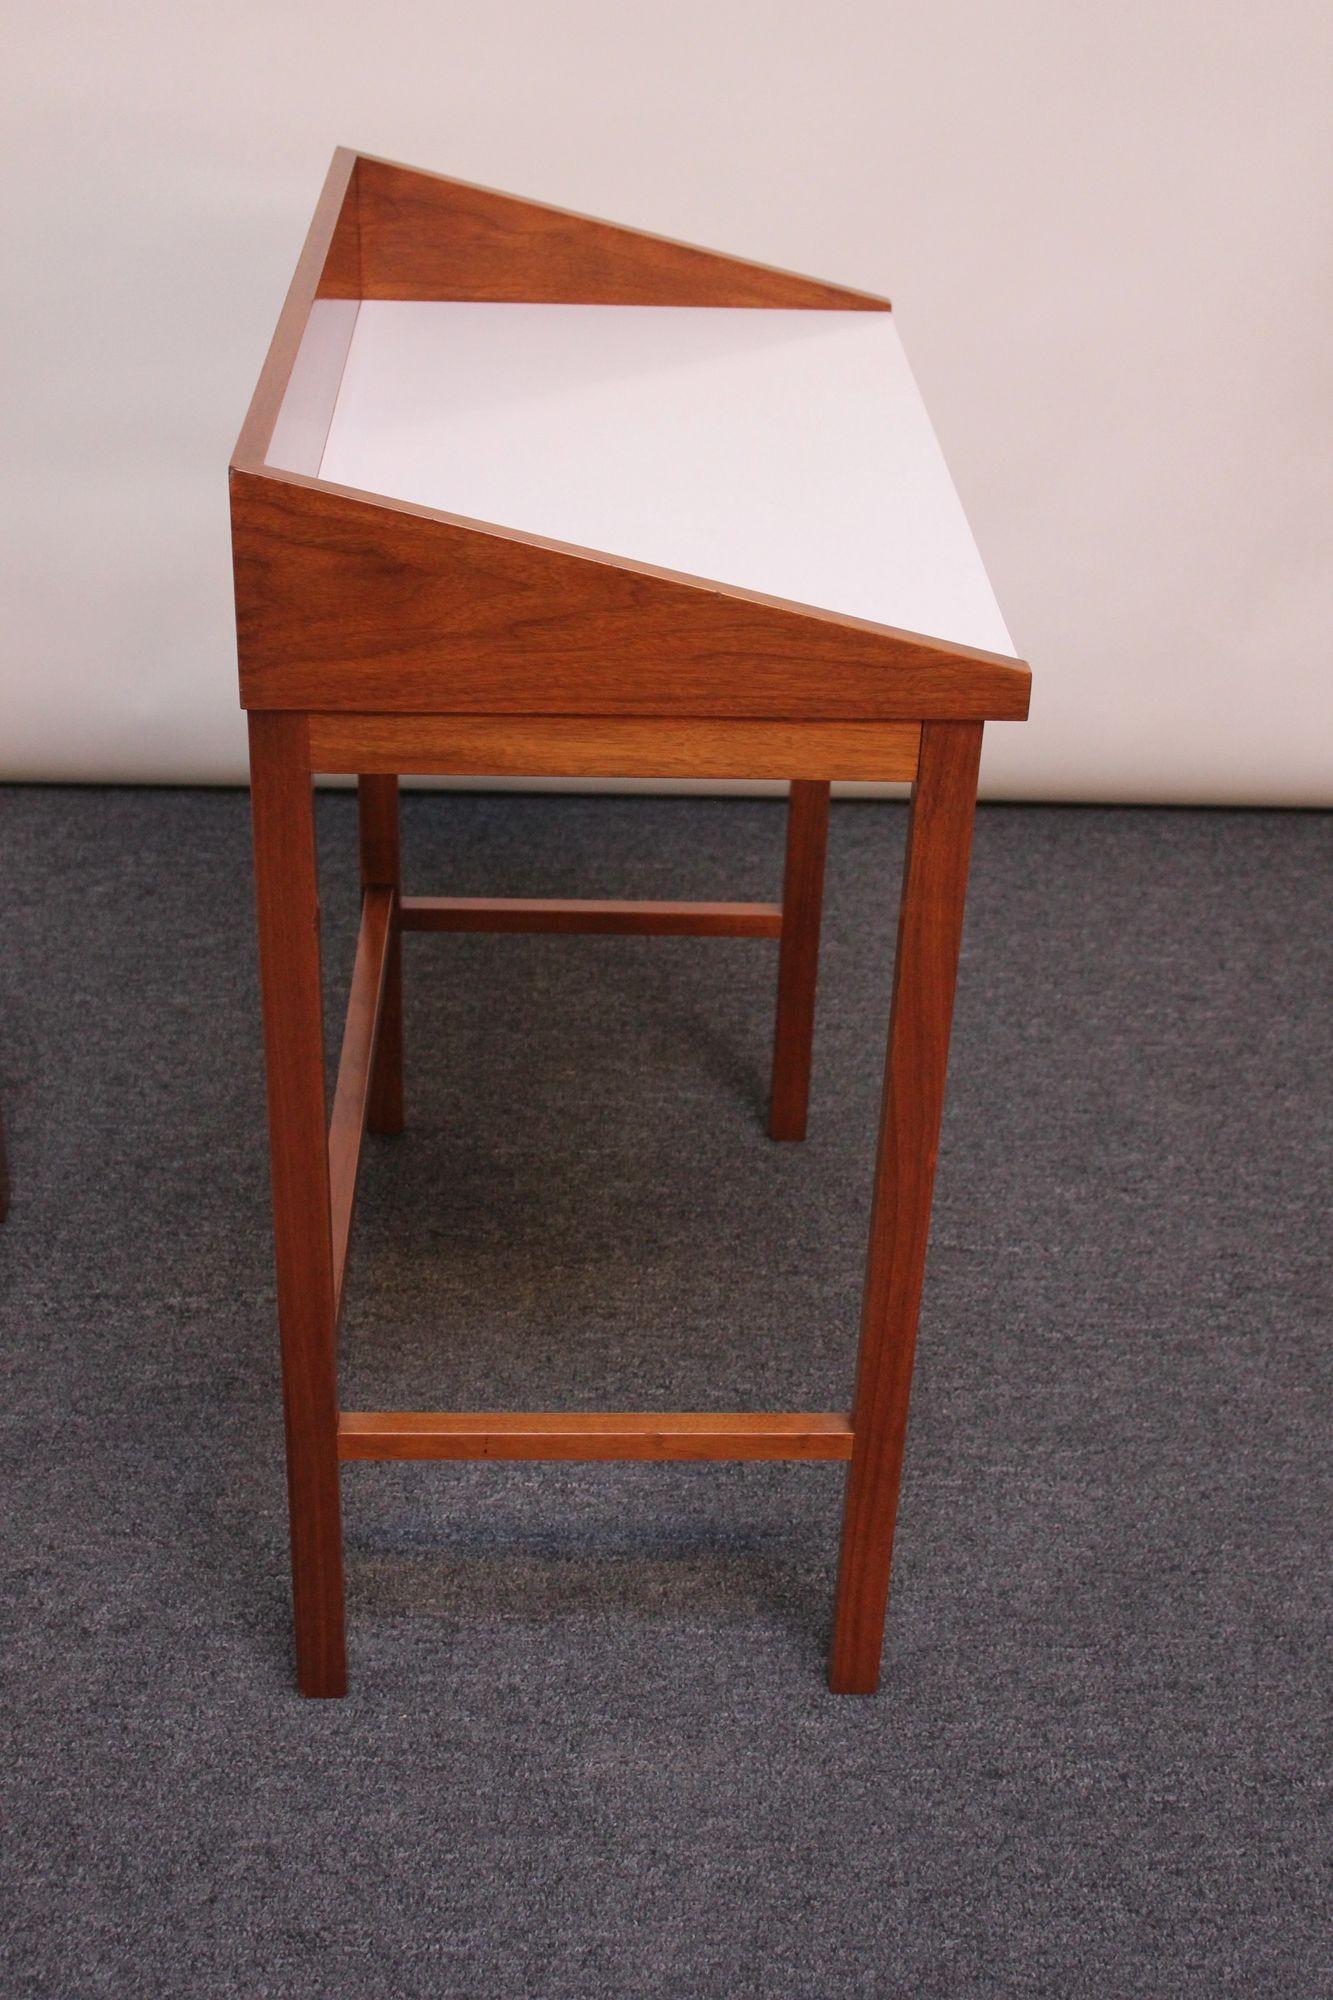 Mid-20th Century Petite Vanity/Writing Table with Stool Designed by Edward Wormley for Dunbar For Sale